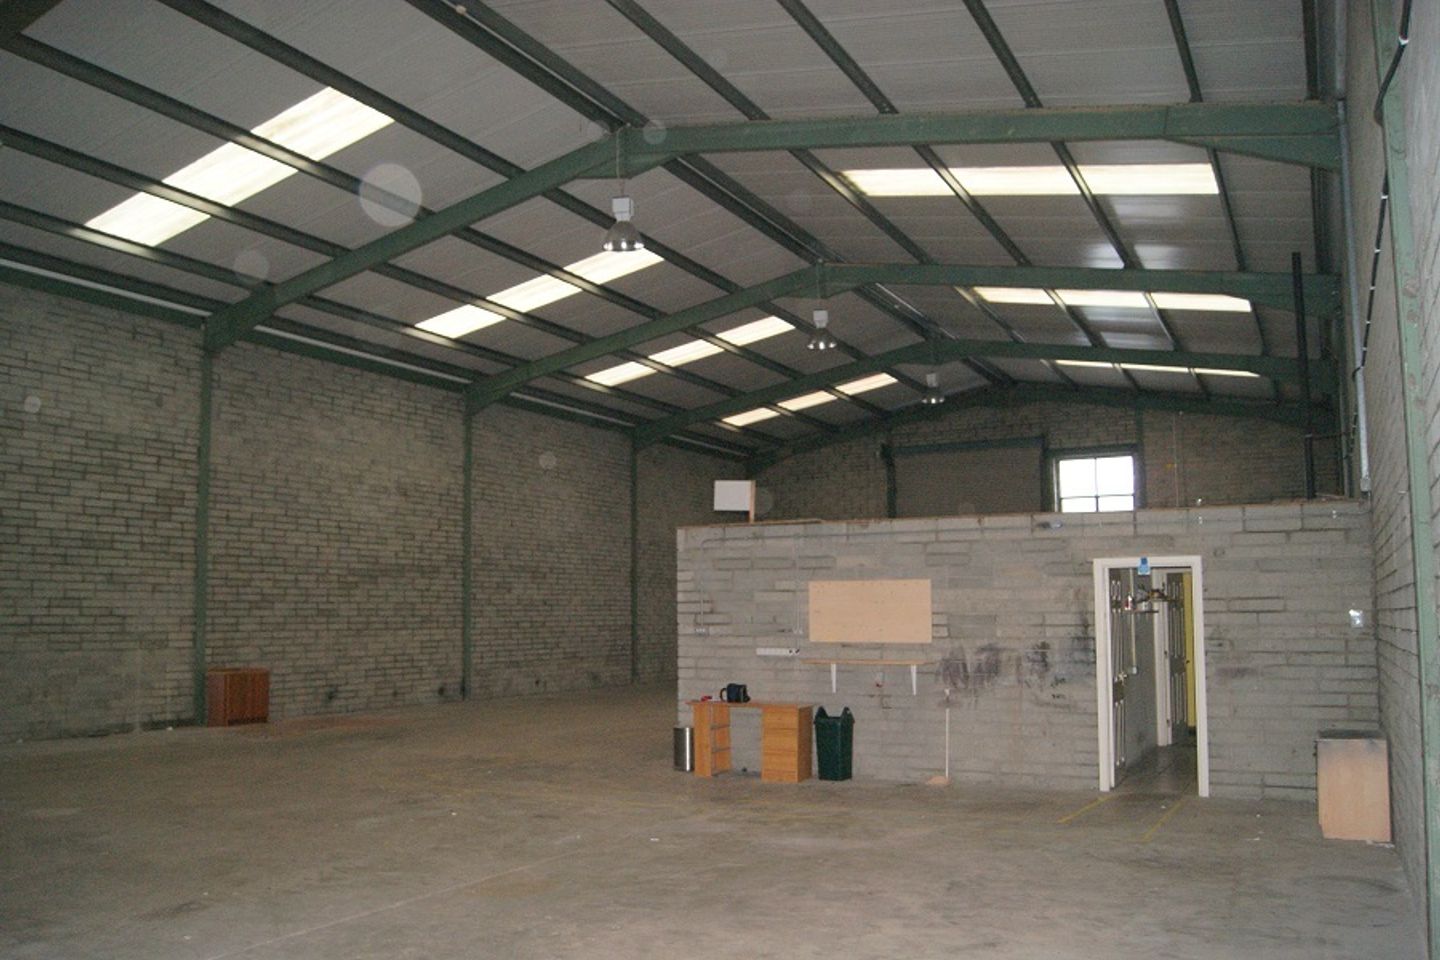 5 Units, 5 Units, Kerlogue Industrial Estate, Drinagh, Wexford Town, Co. Wexford